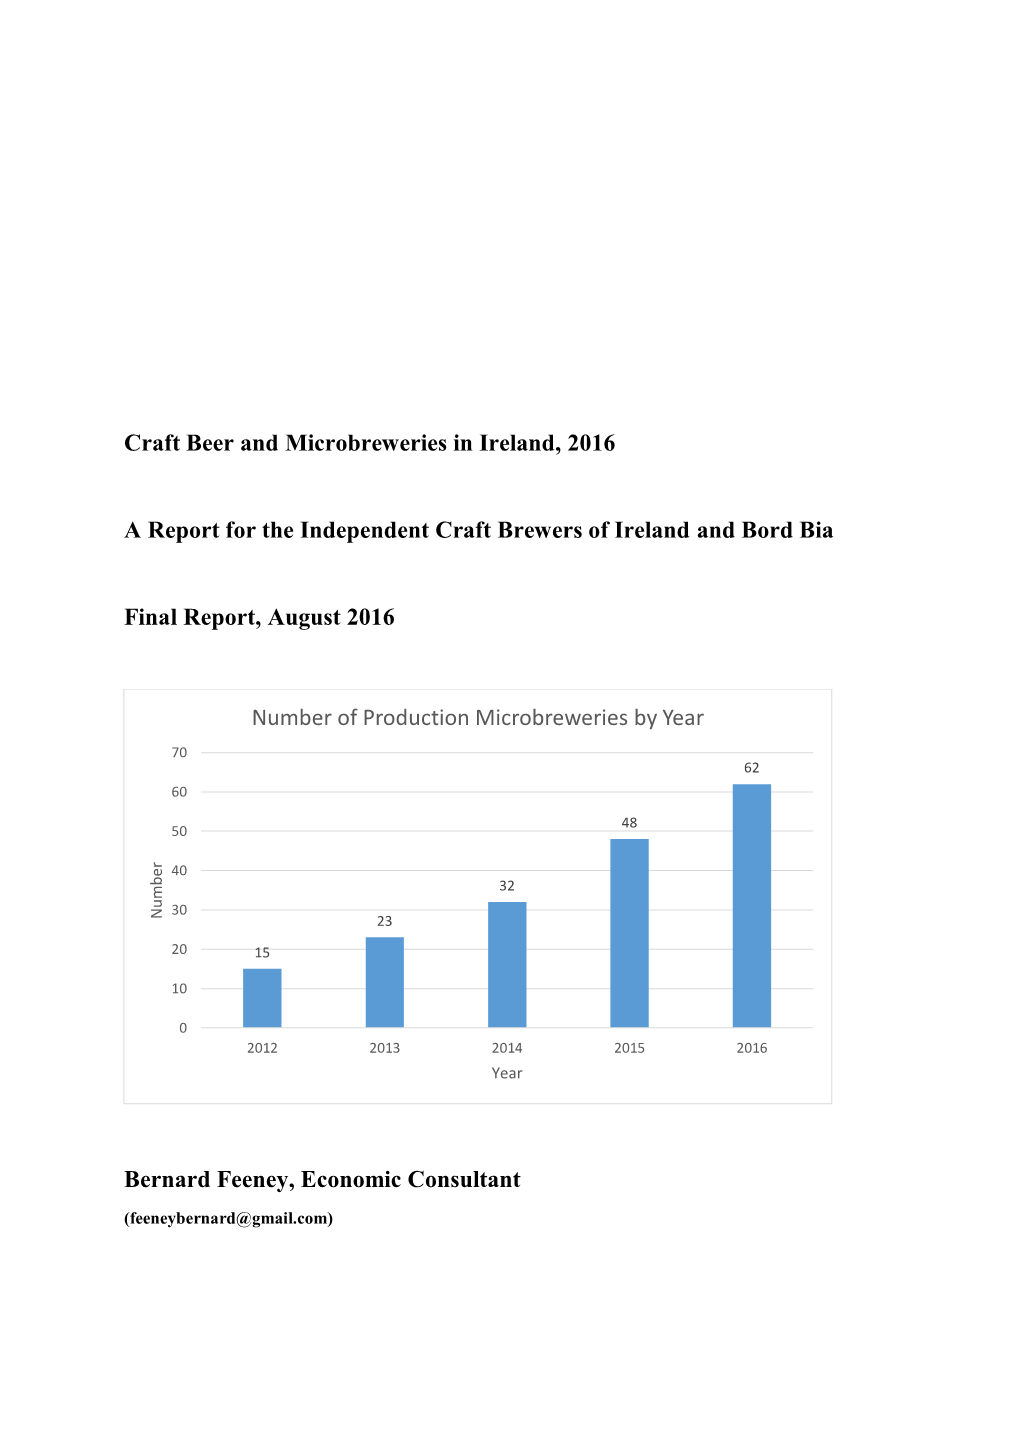 Craft Beer and Microbreweries in Ireland, 2016 a Report